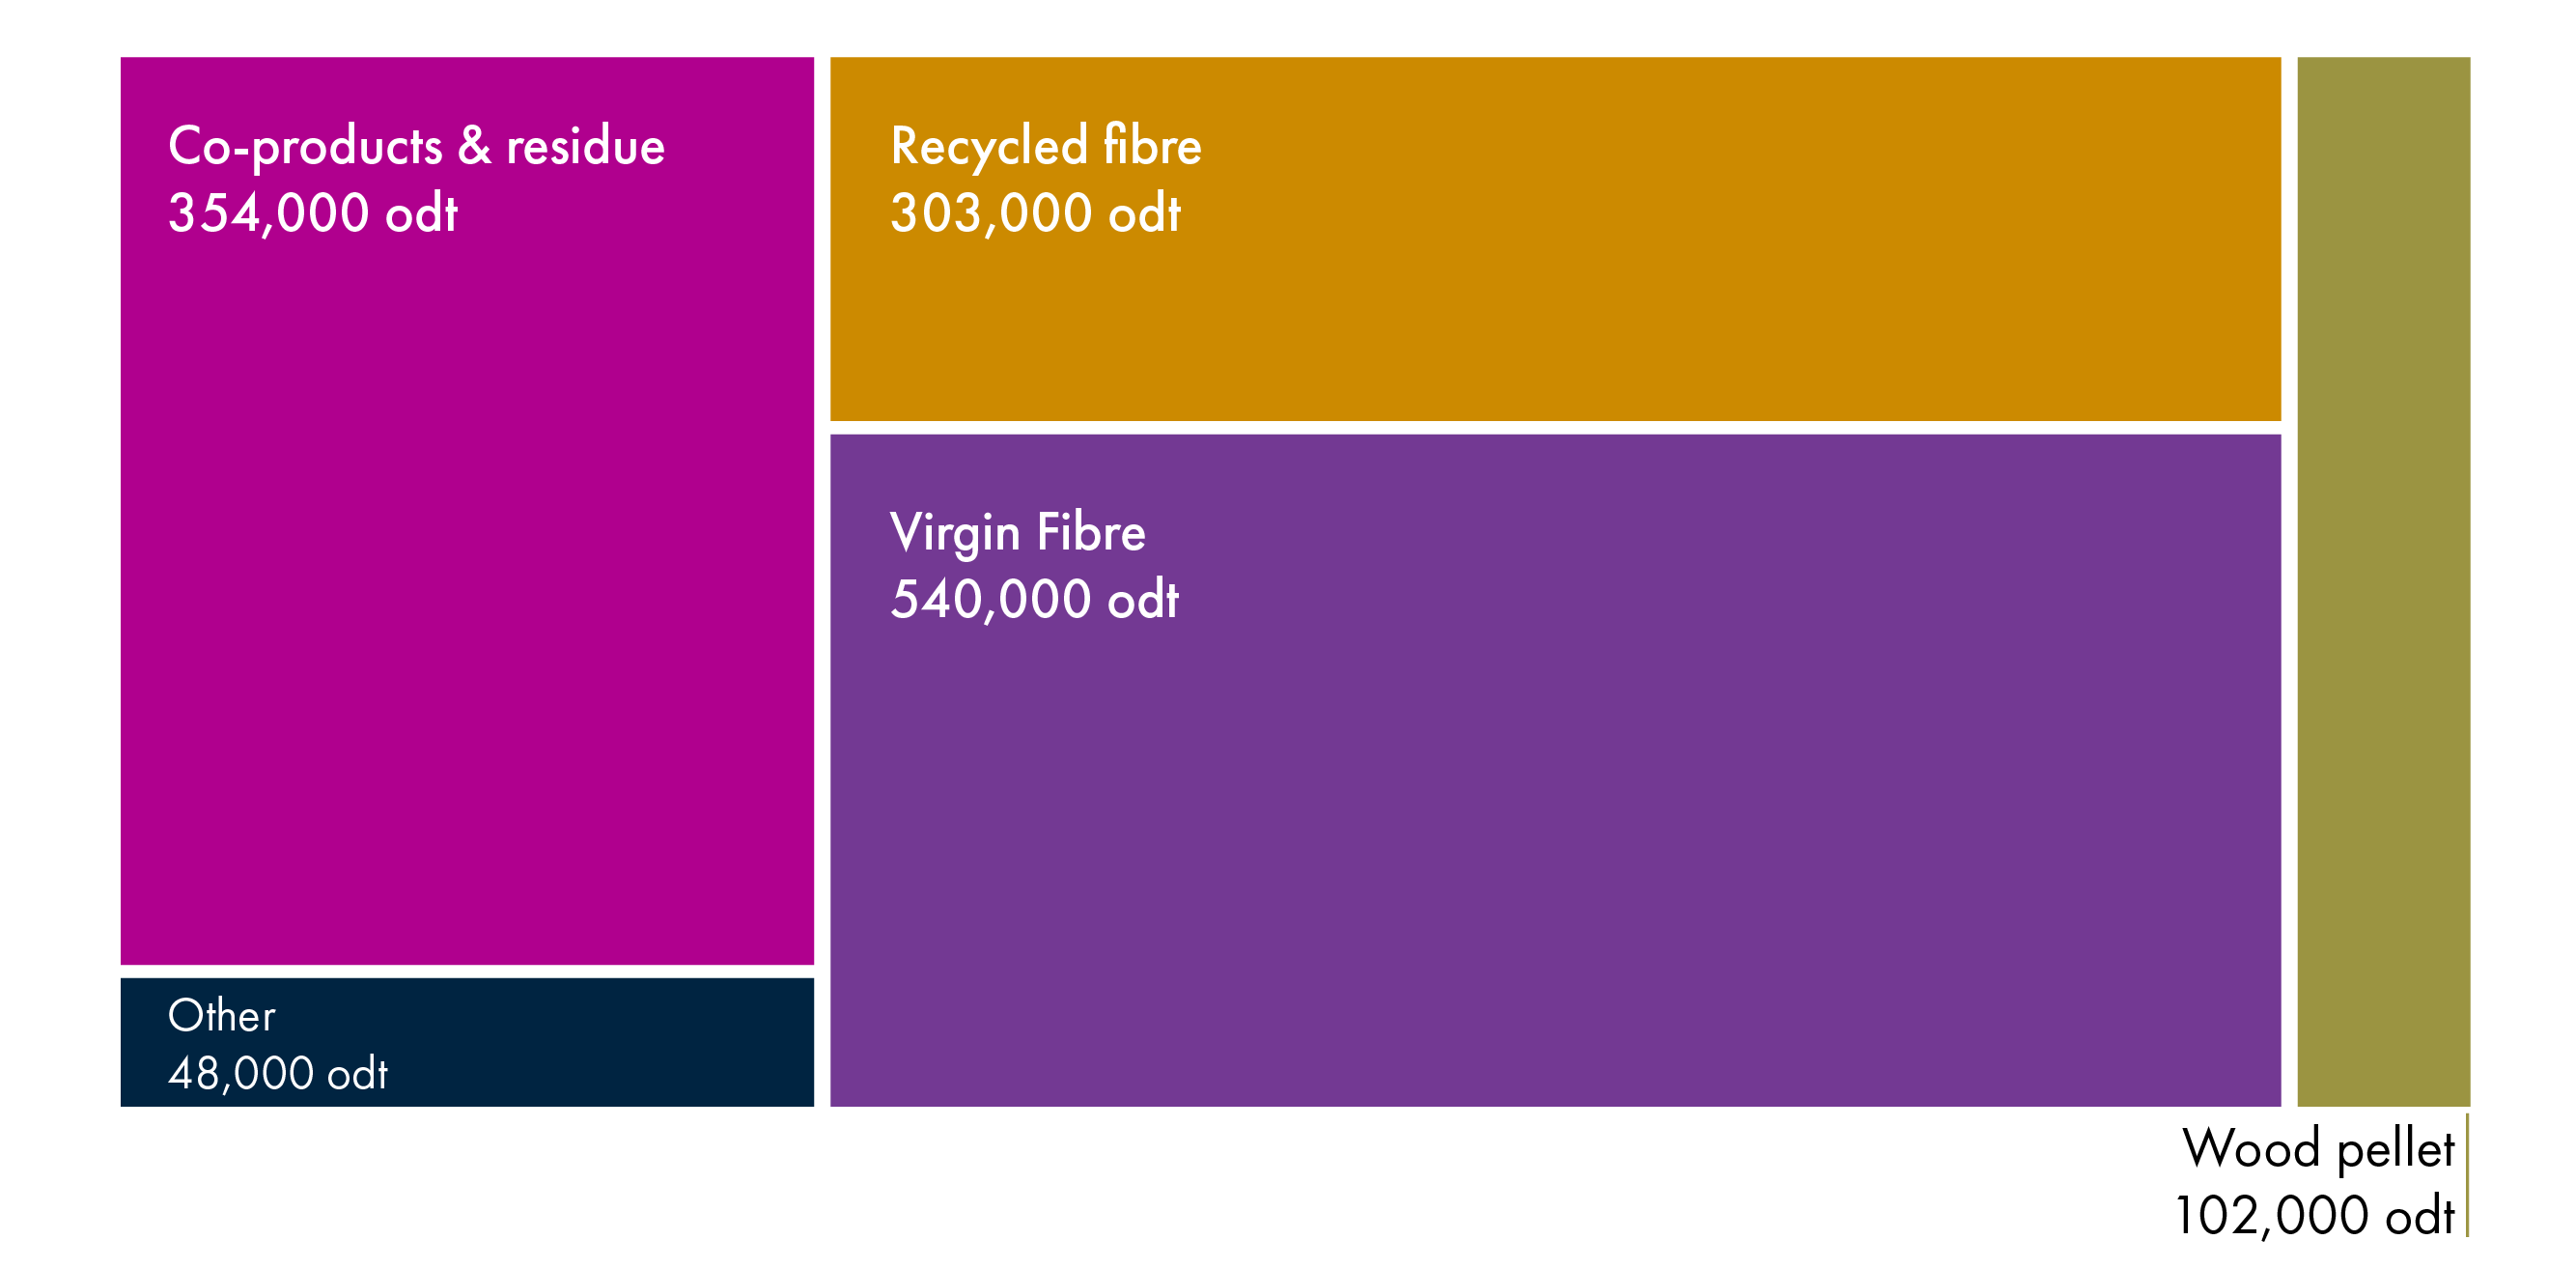 The greatest proportion of woodfuel used in Scotland in 2018 was virgin fibre